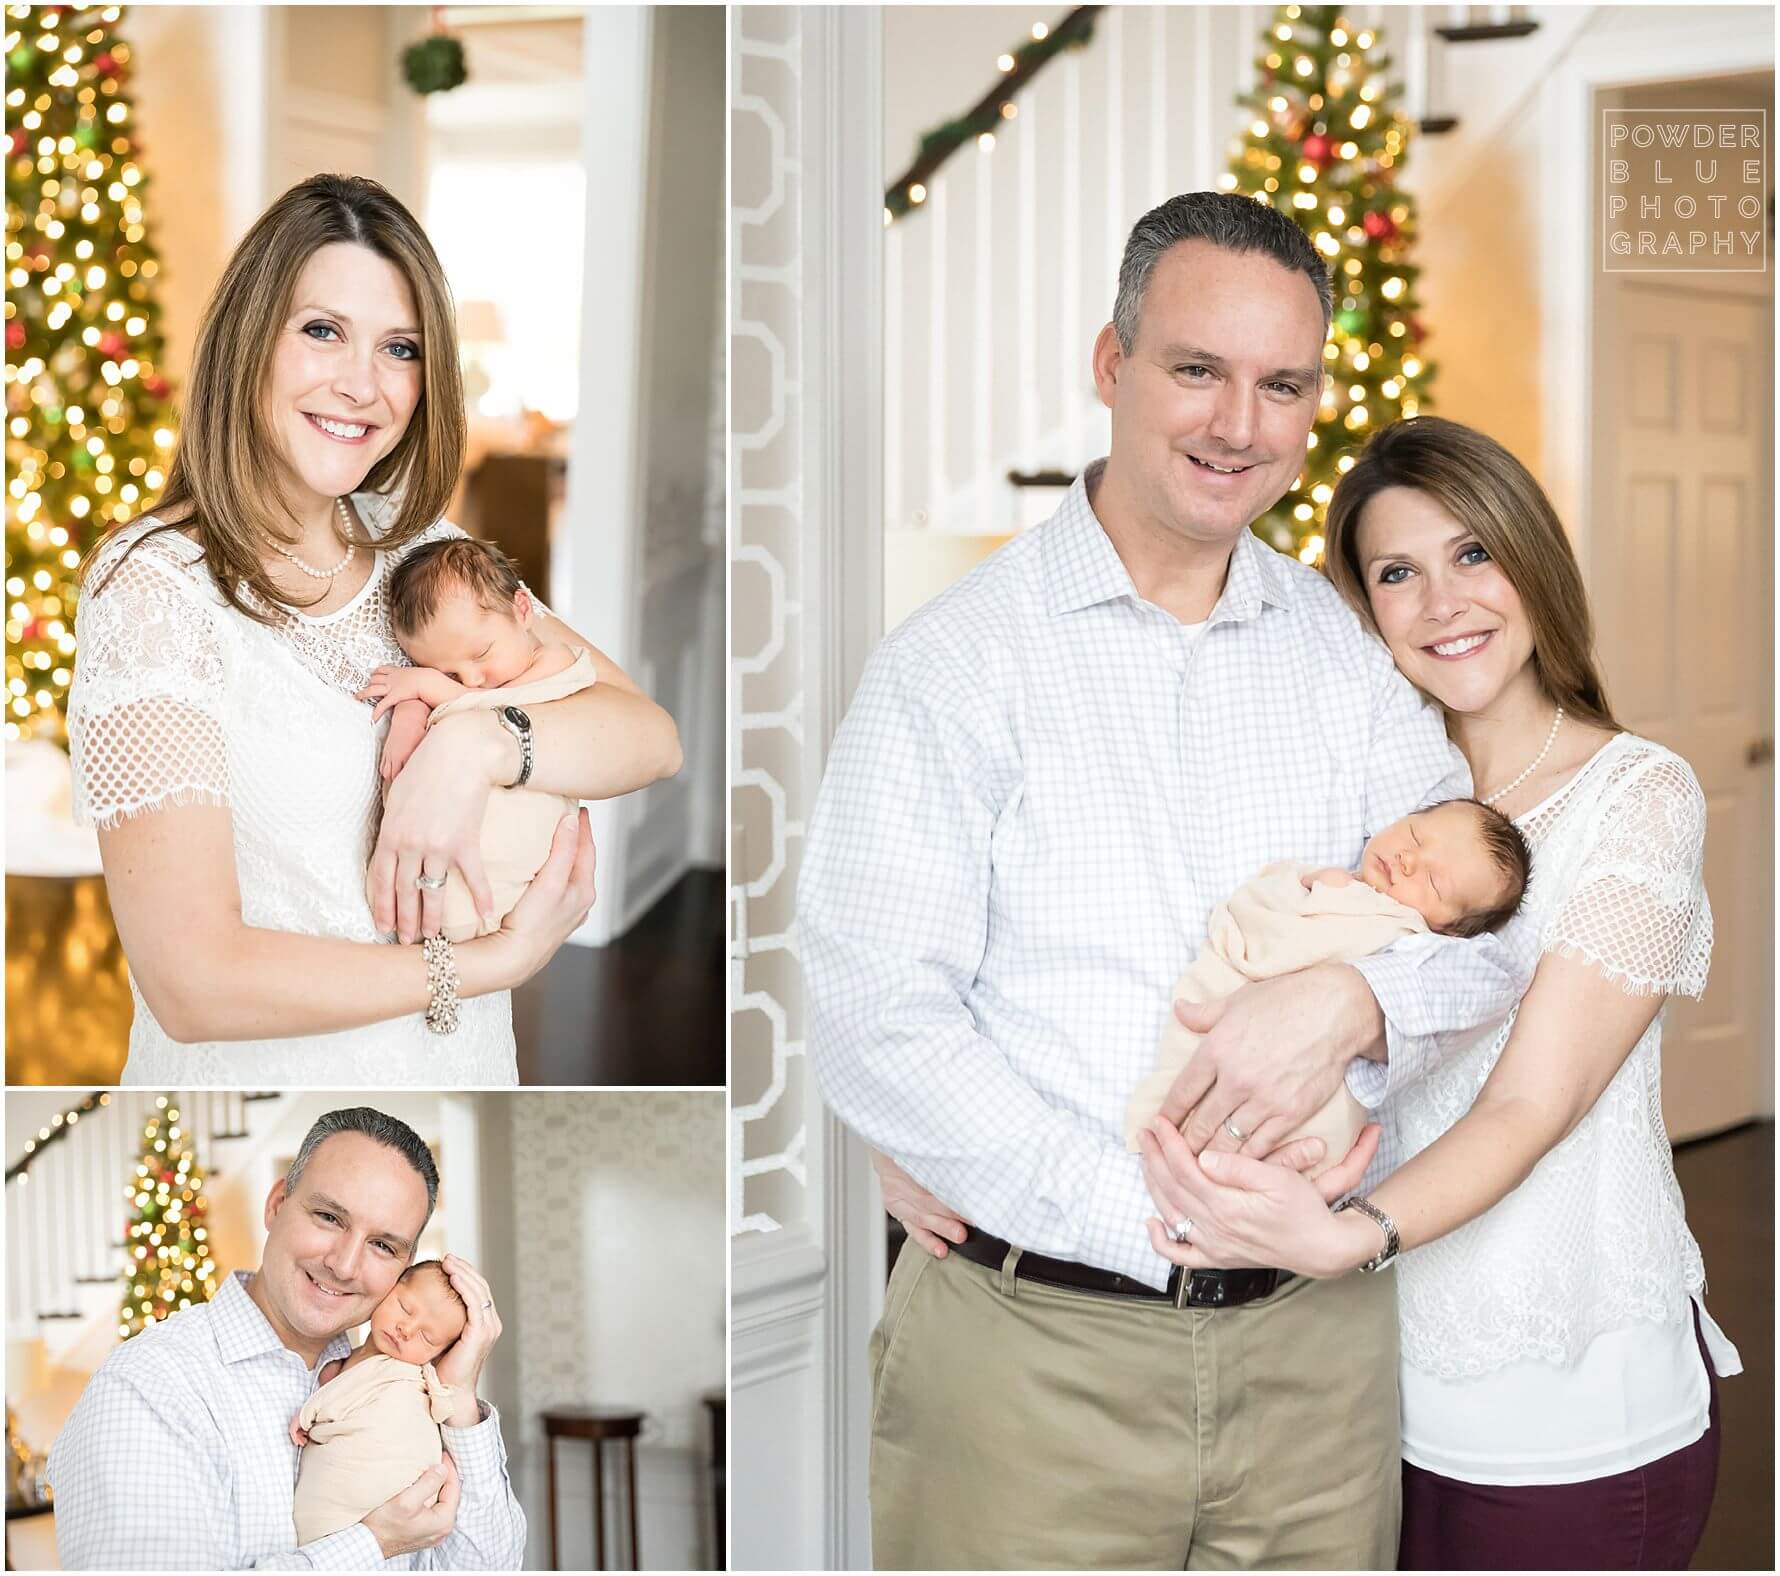 posed family portrait with newborn at christmas time.